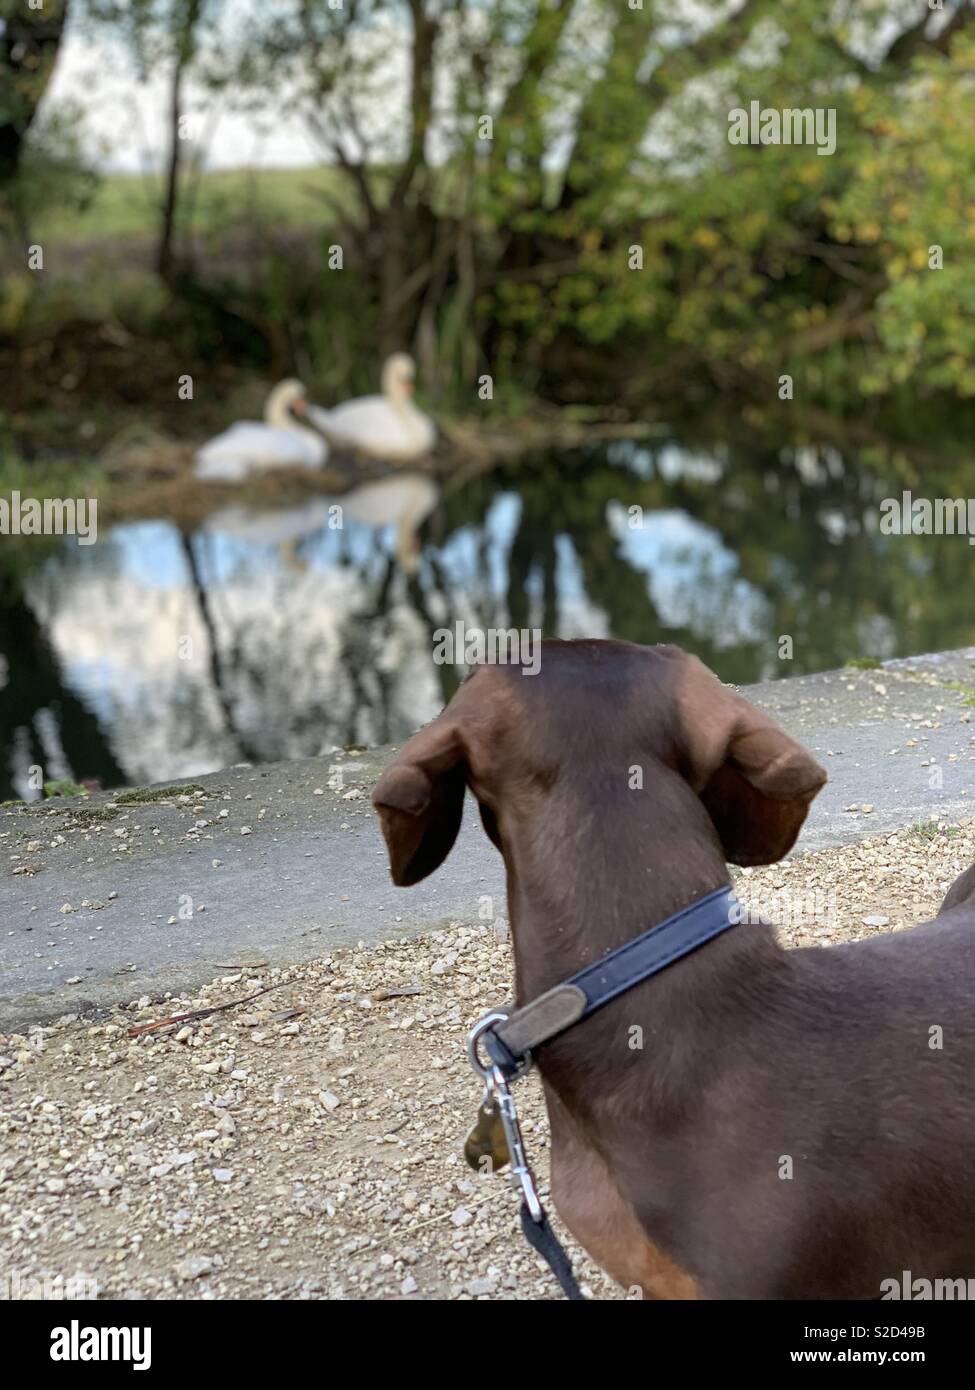 Frank the sausage spots some swans Stock Photo